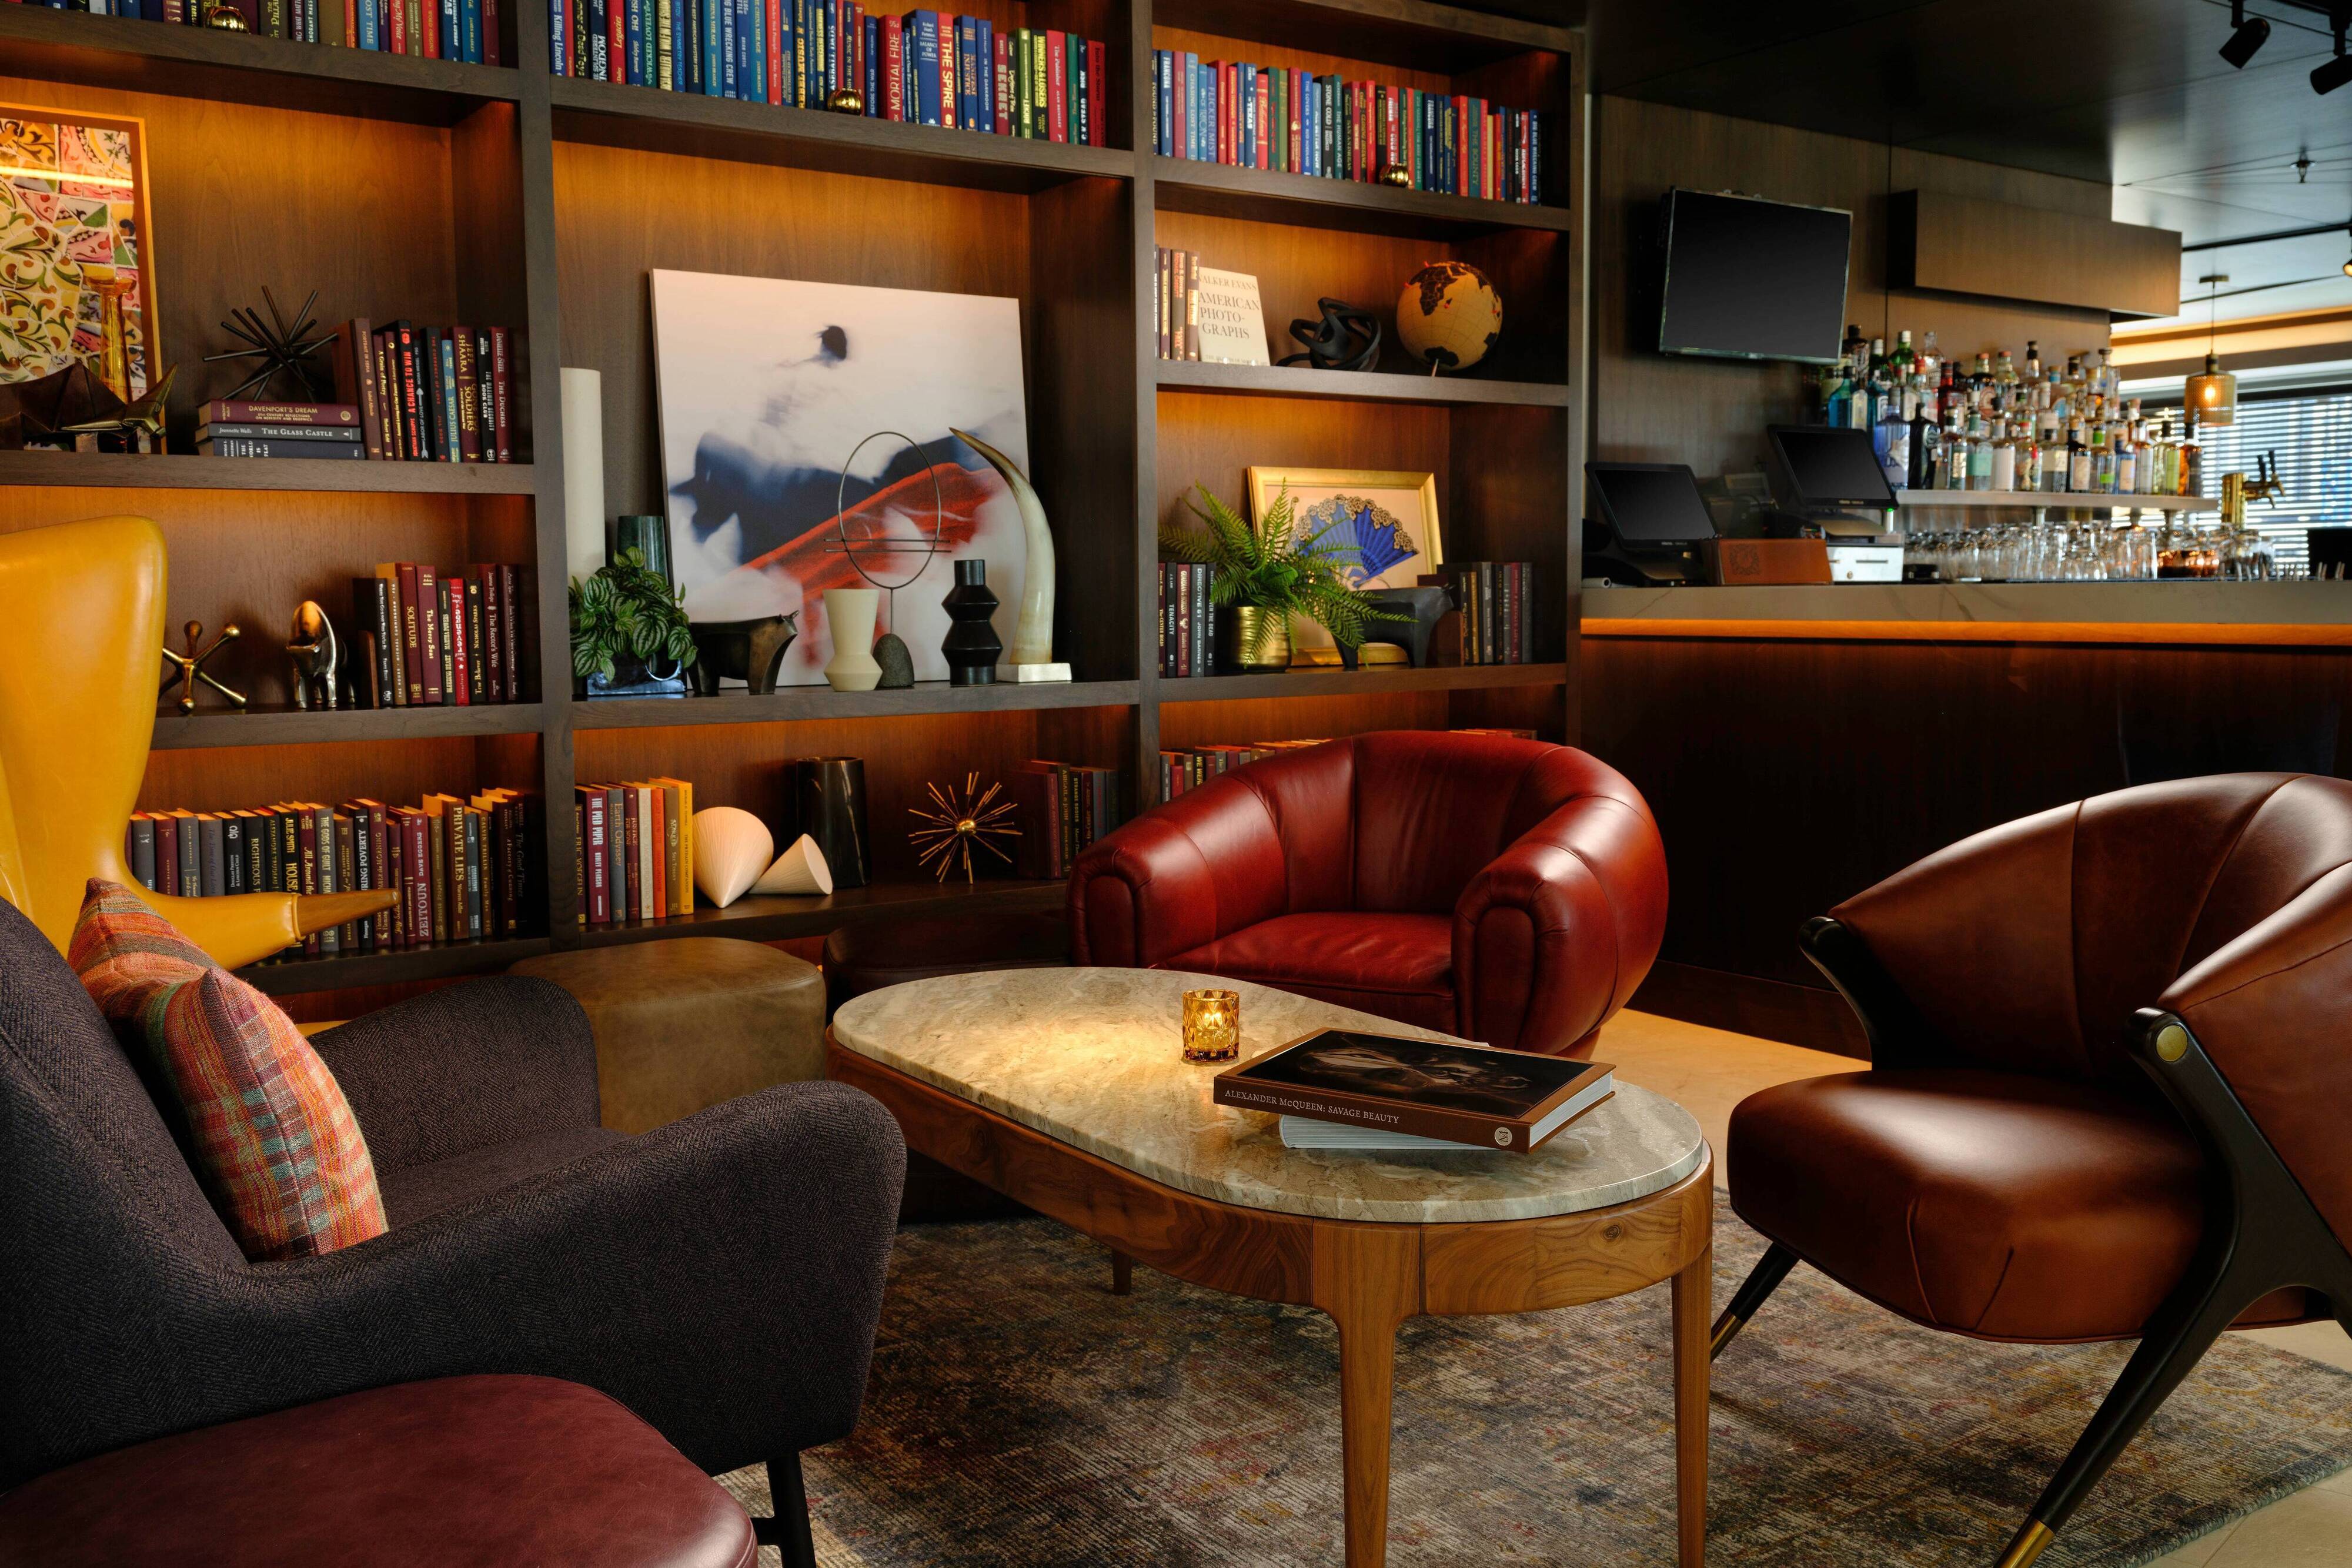 Hotel library seating area